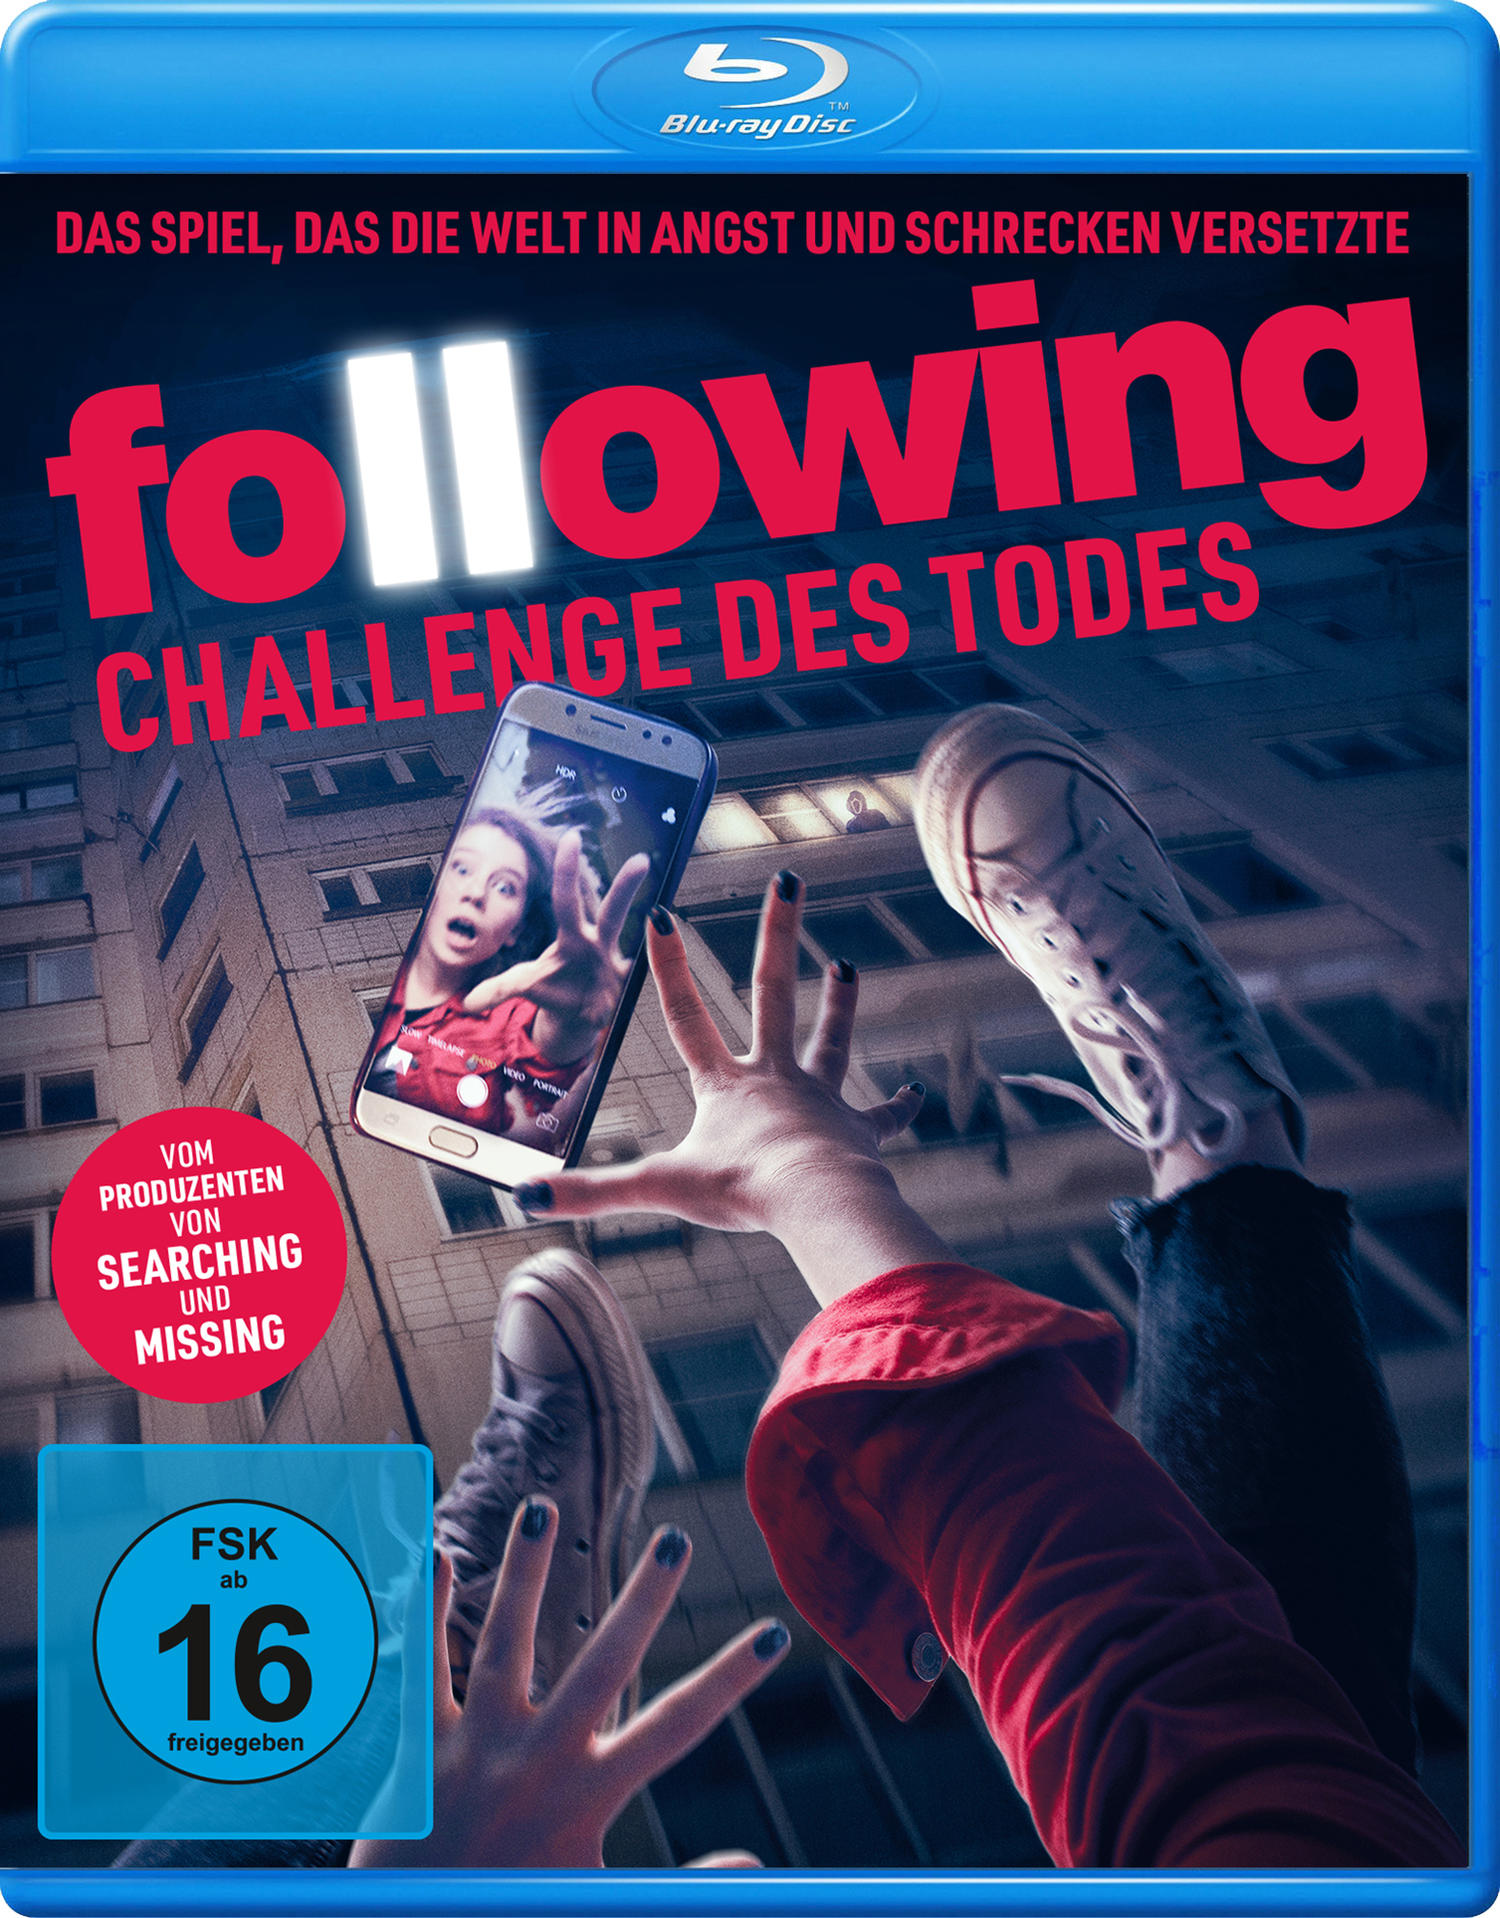 Todes - des Blu-ray Challenge following